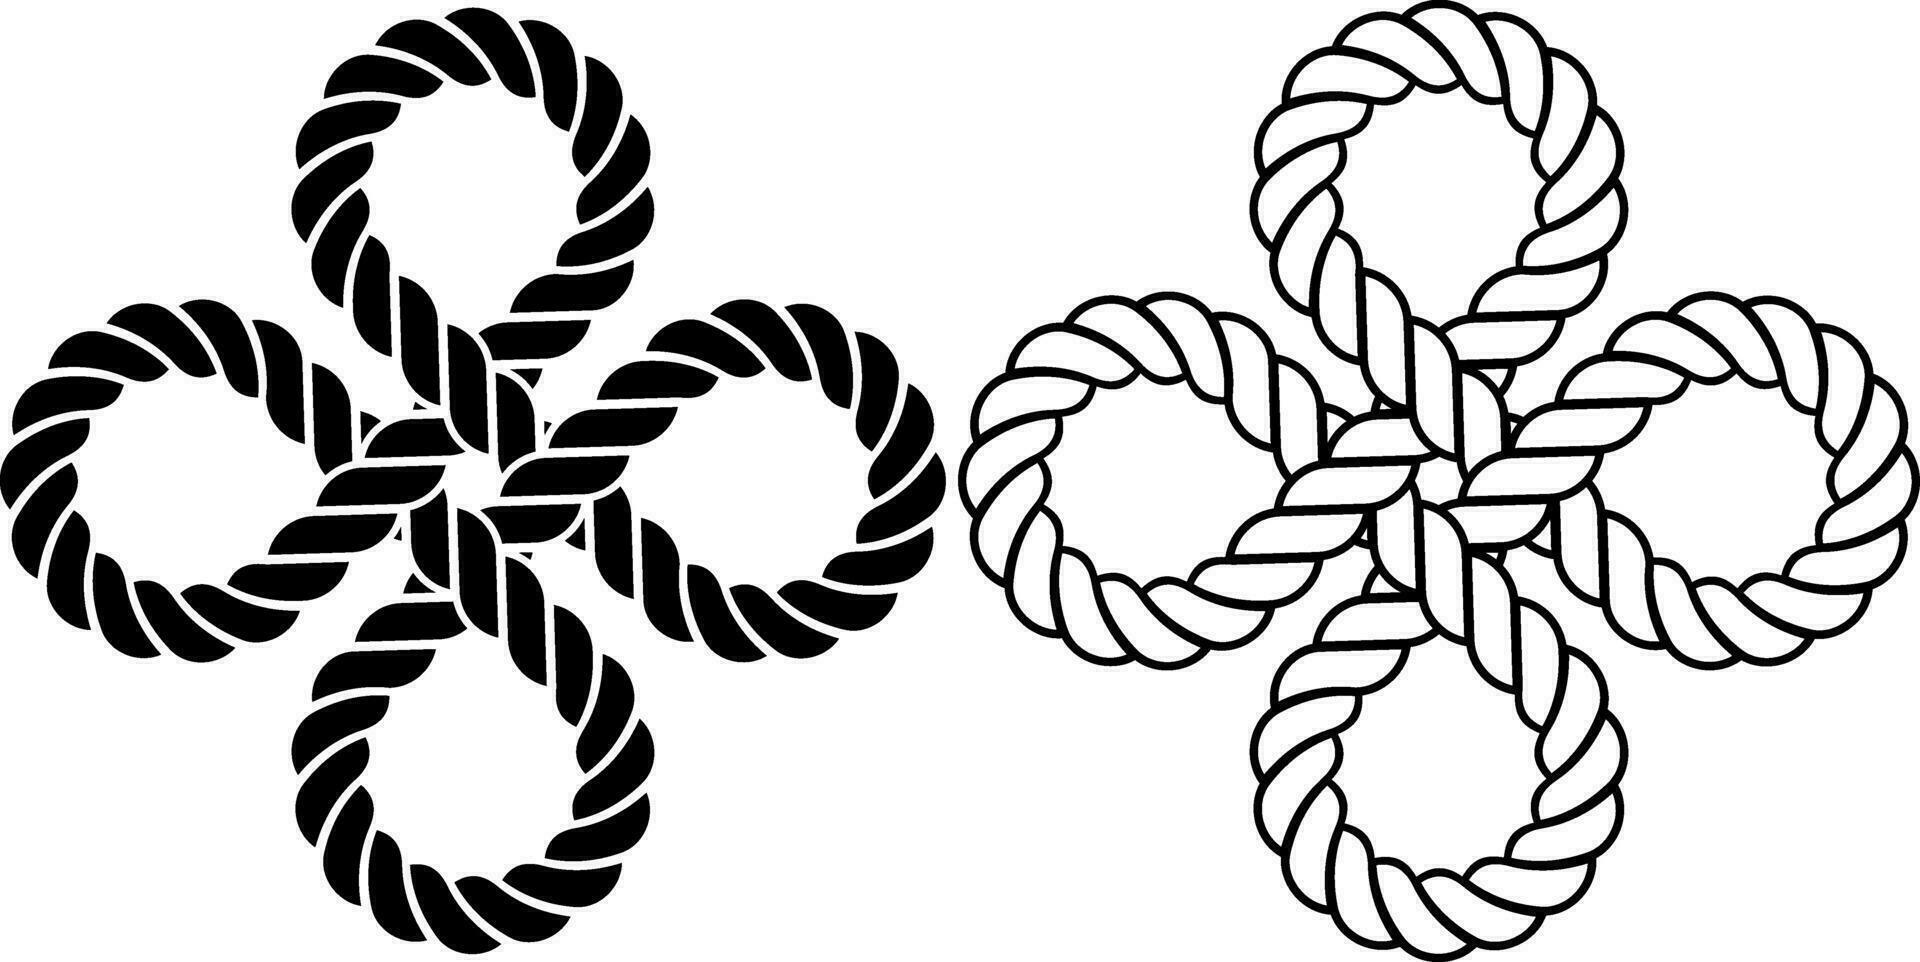 four leaf clover rope knot icon set vector